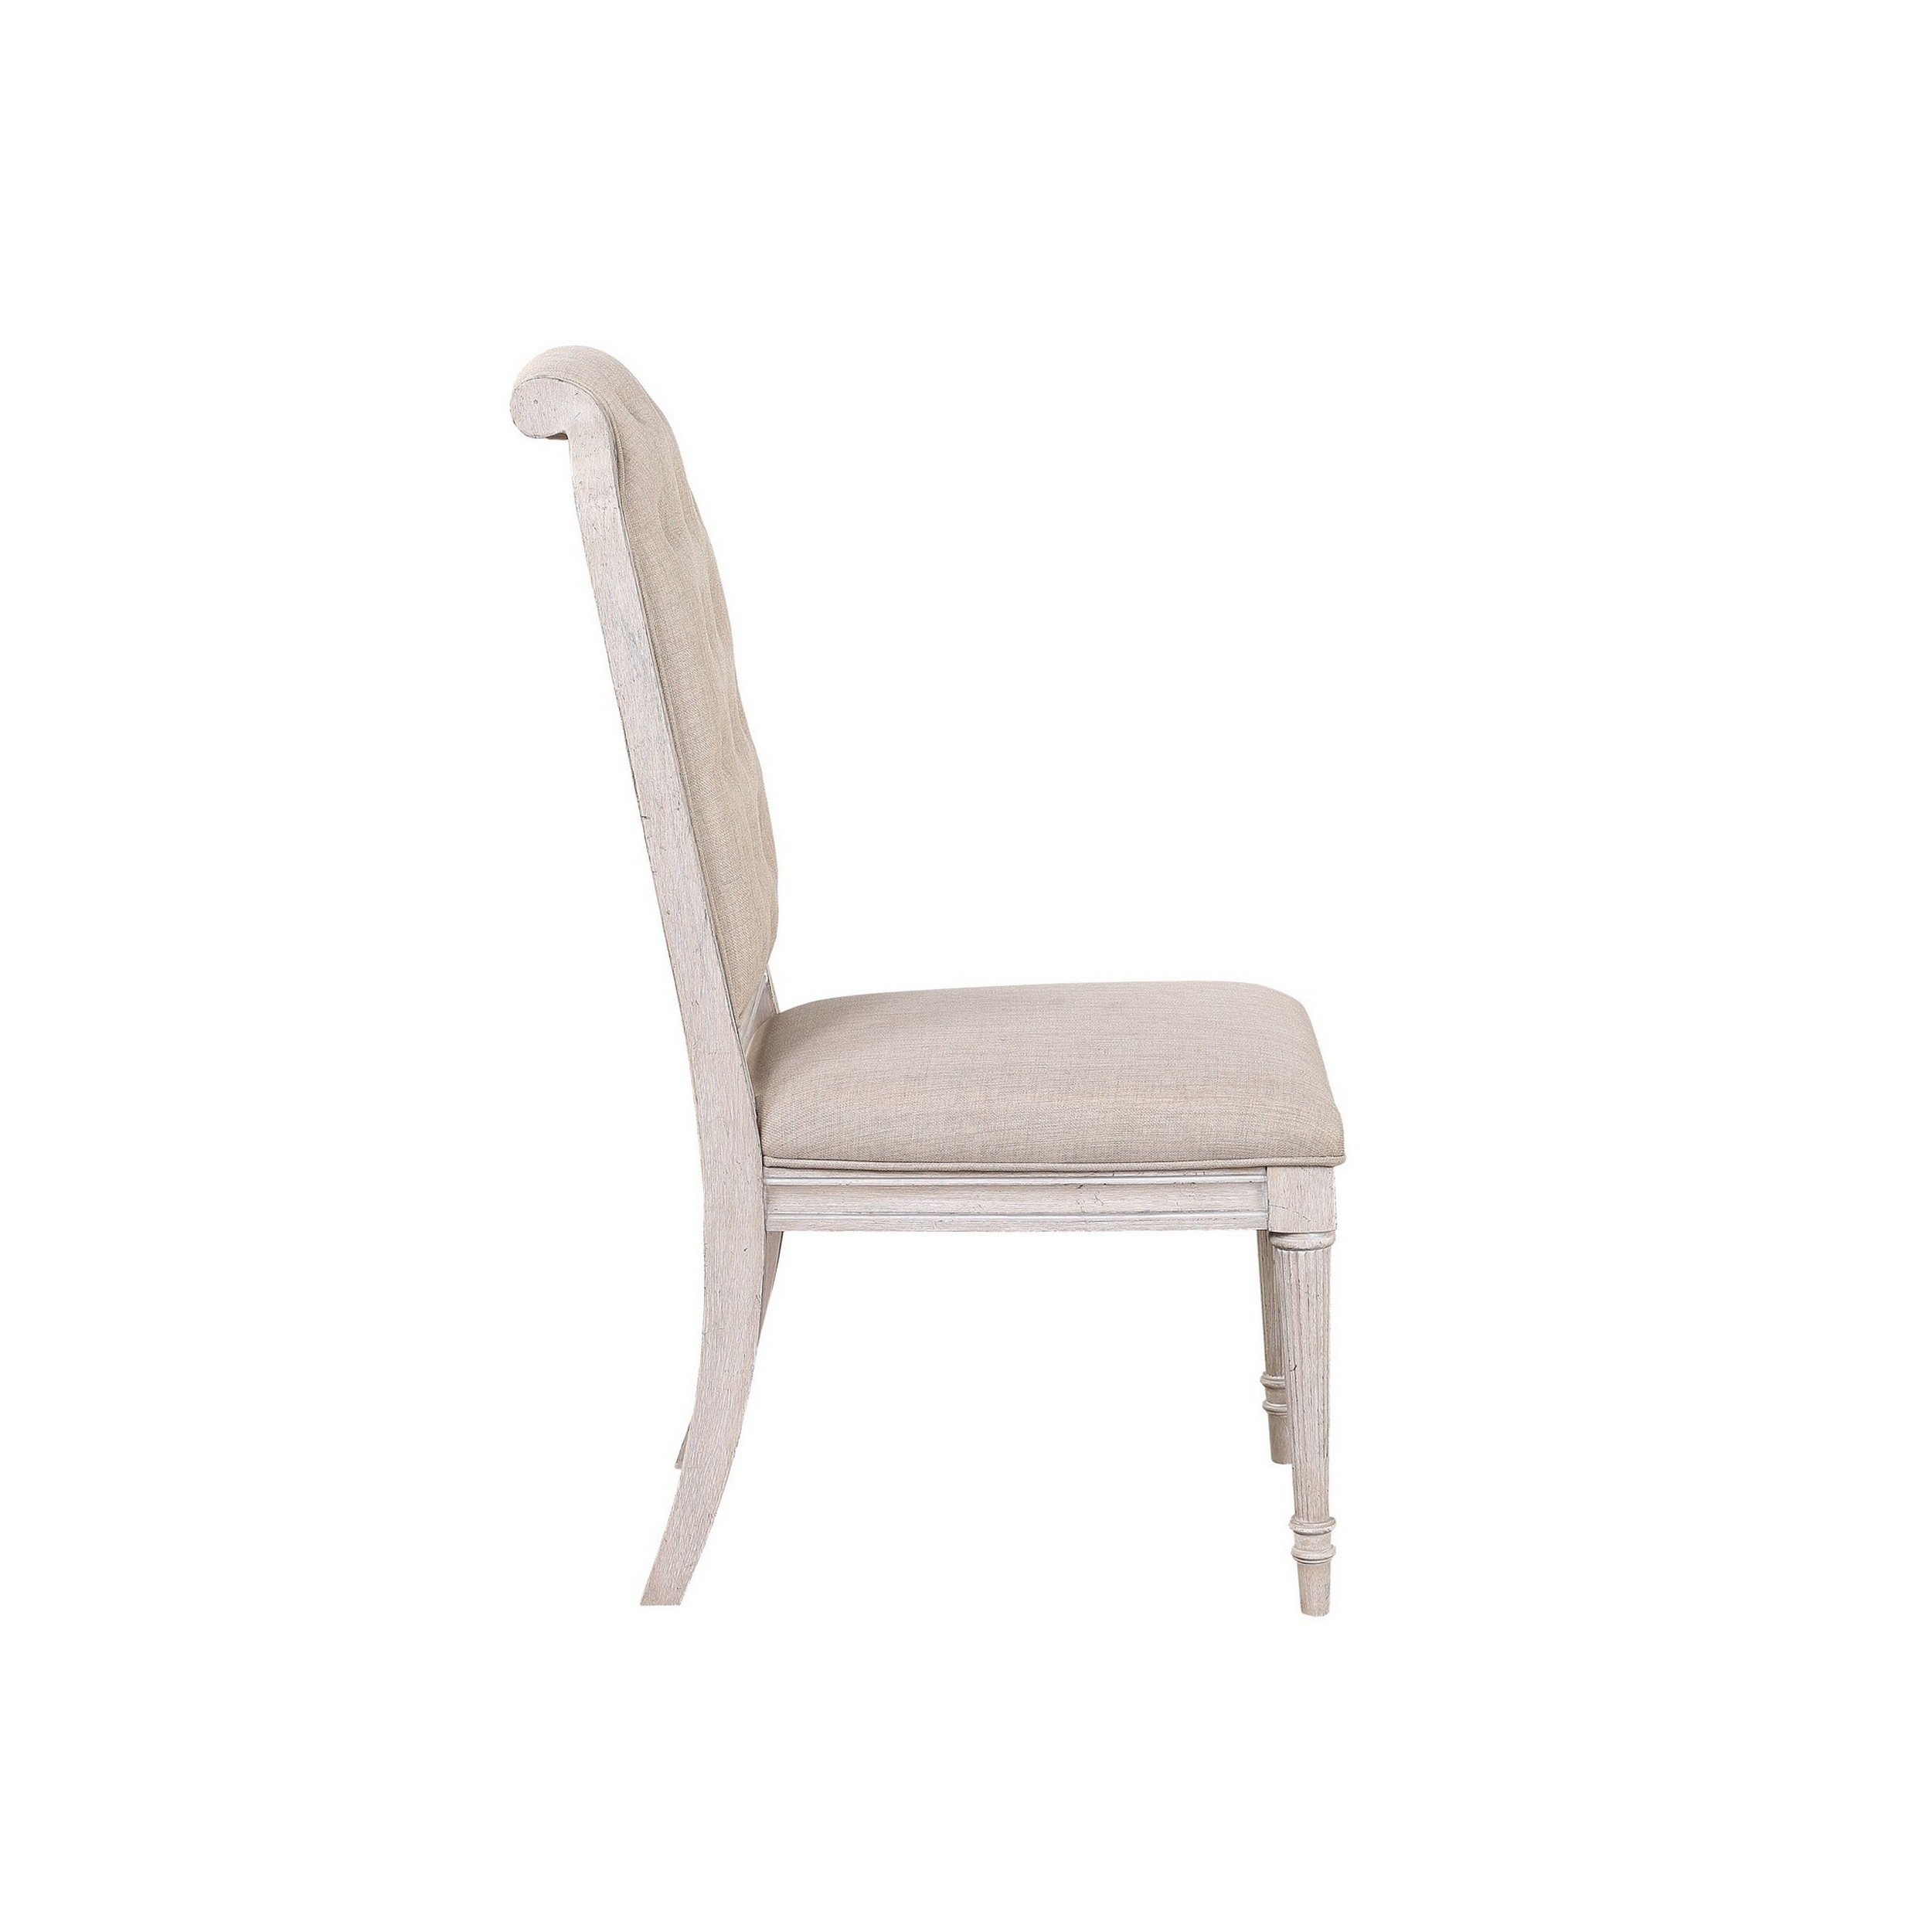 Side Chair With Tapered Legs And Button Tufted Back, Set Of 2, Beige- Saltoro Sherpi